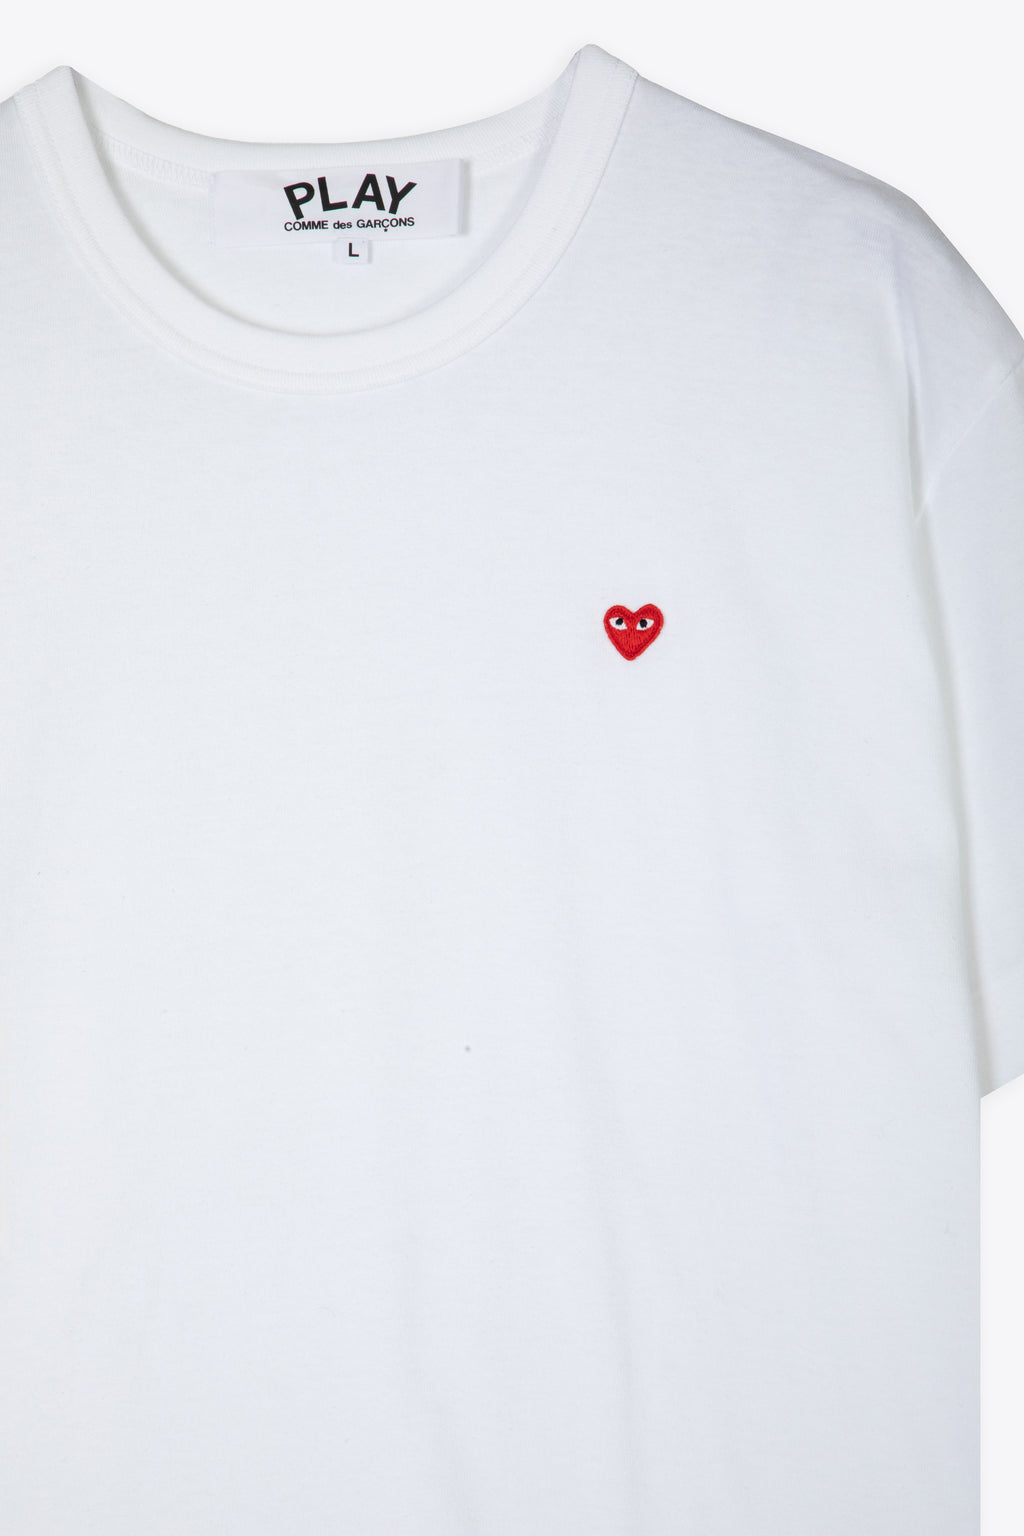 alt-image__White-cotton-t-shirt-with-small-heart